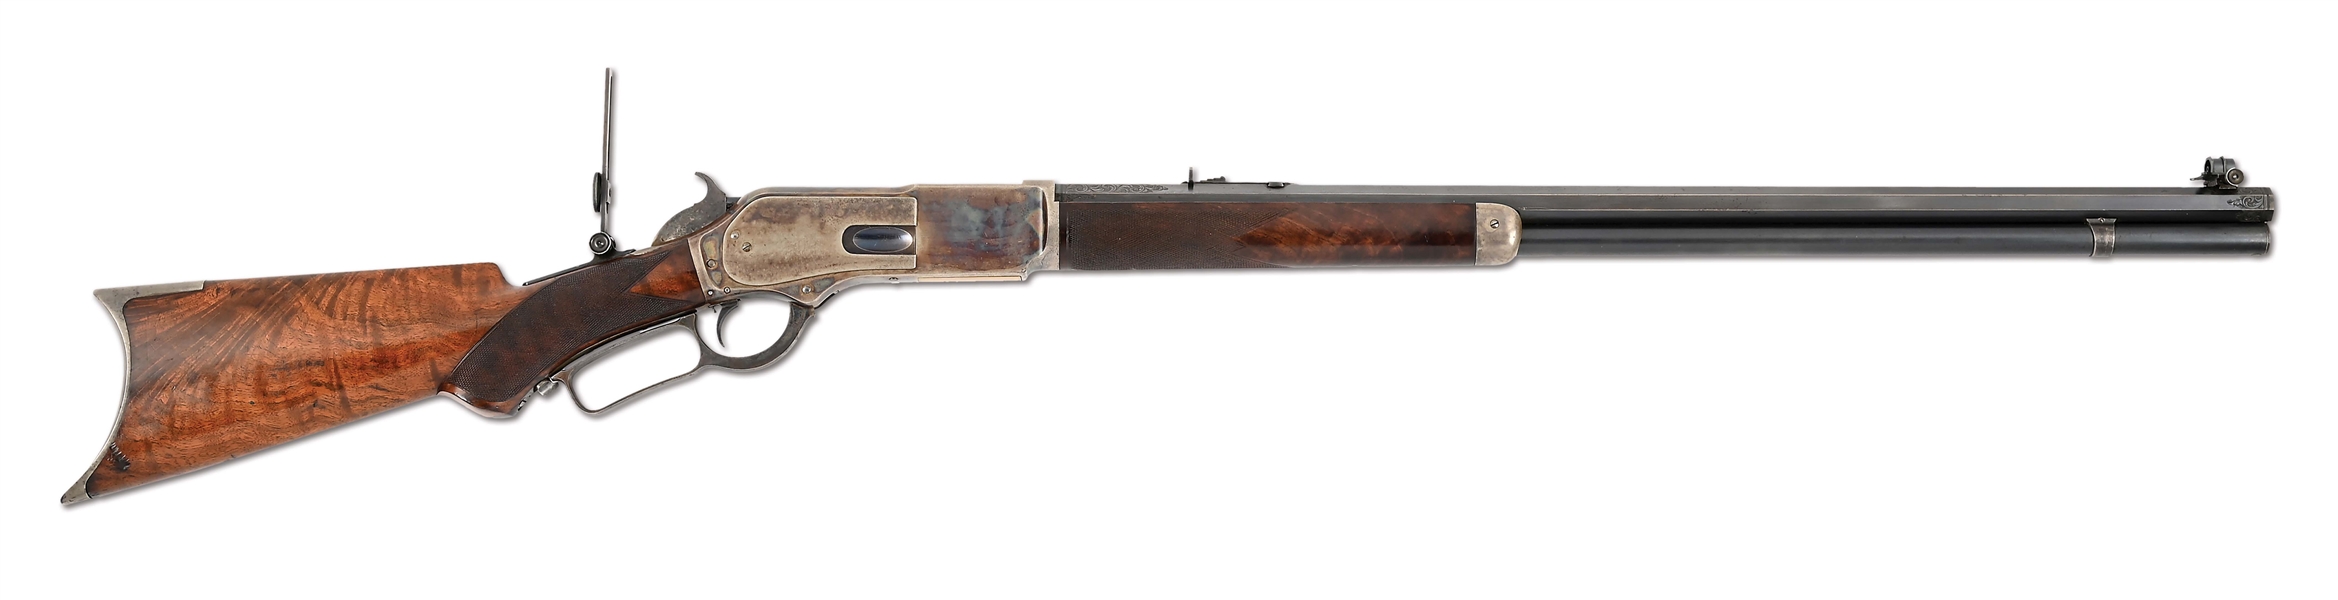 (A) OUTSTANDING, EXCEPTIONALLY RARE, EXTREMELY HIGH CONDITION, WINCHESTER “1 OF 1000” 1876 LEVER ACTION RIFLE.